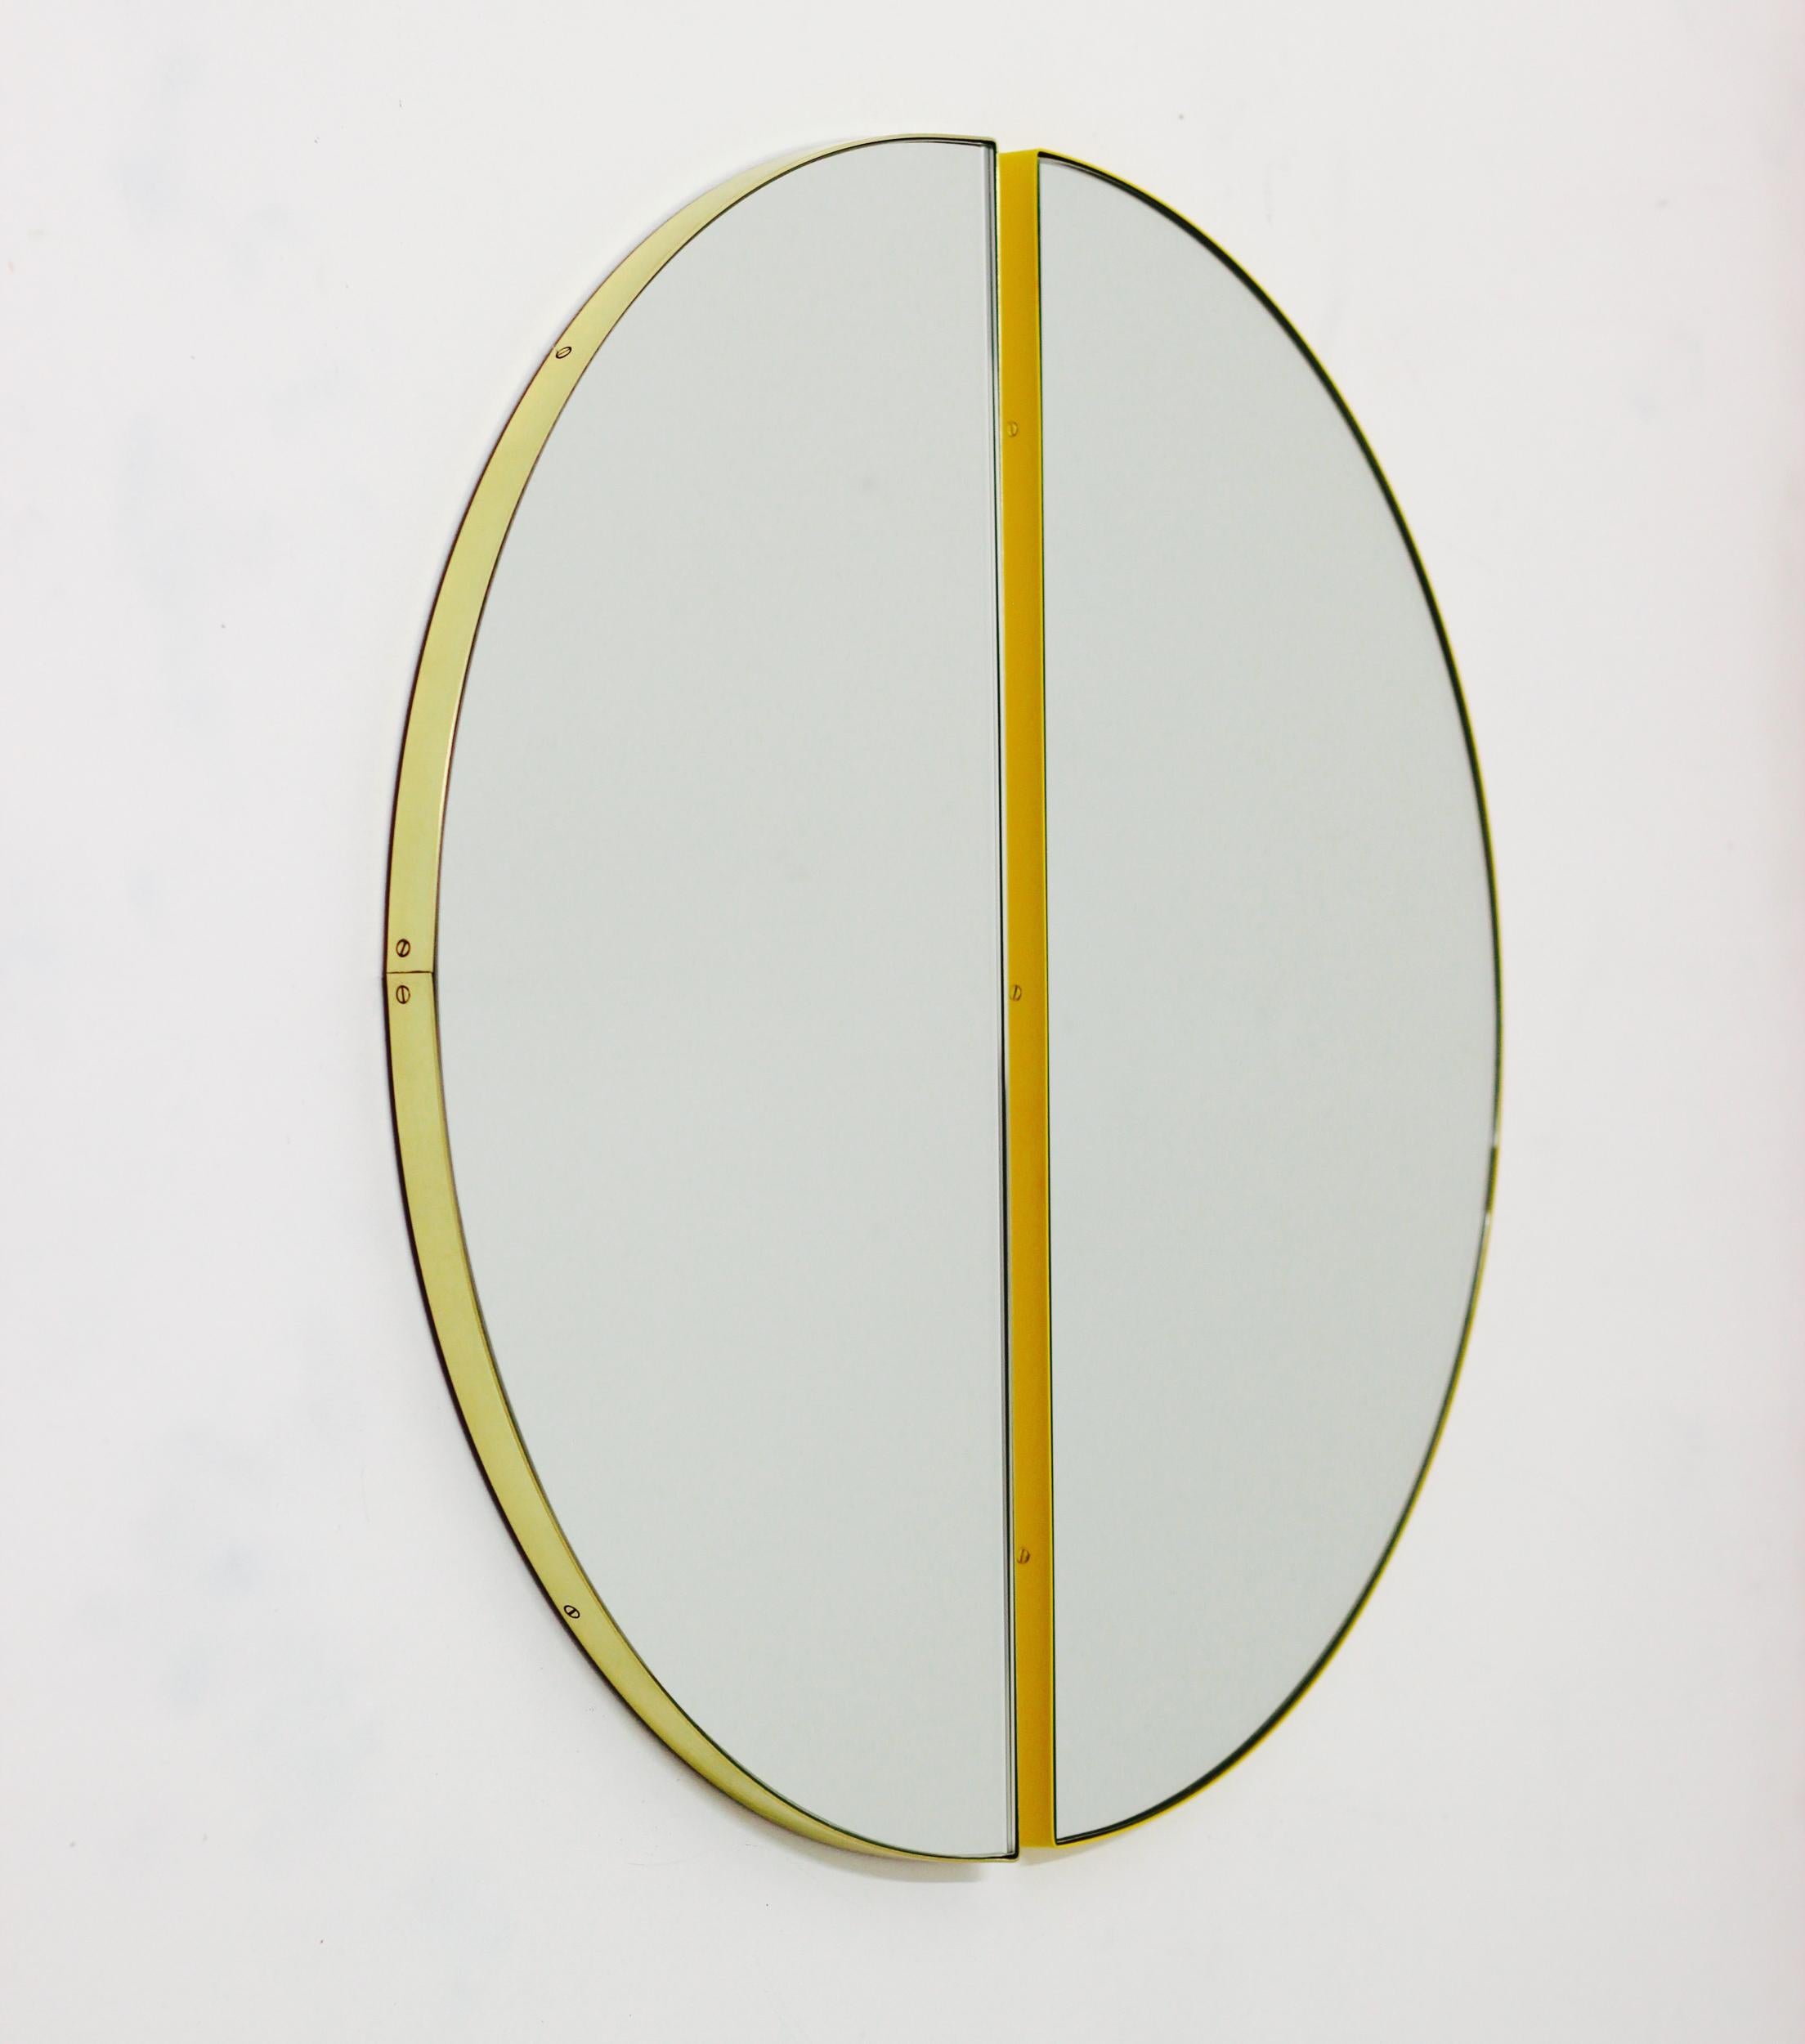 British Luna Half-Moon Circular Modern Mirror with a Yellow Frame, Customisable, Large For Sale